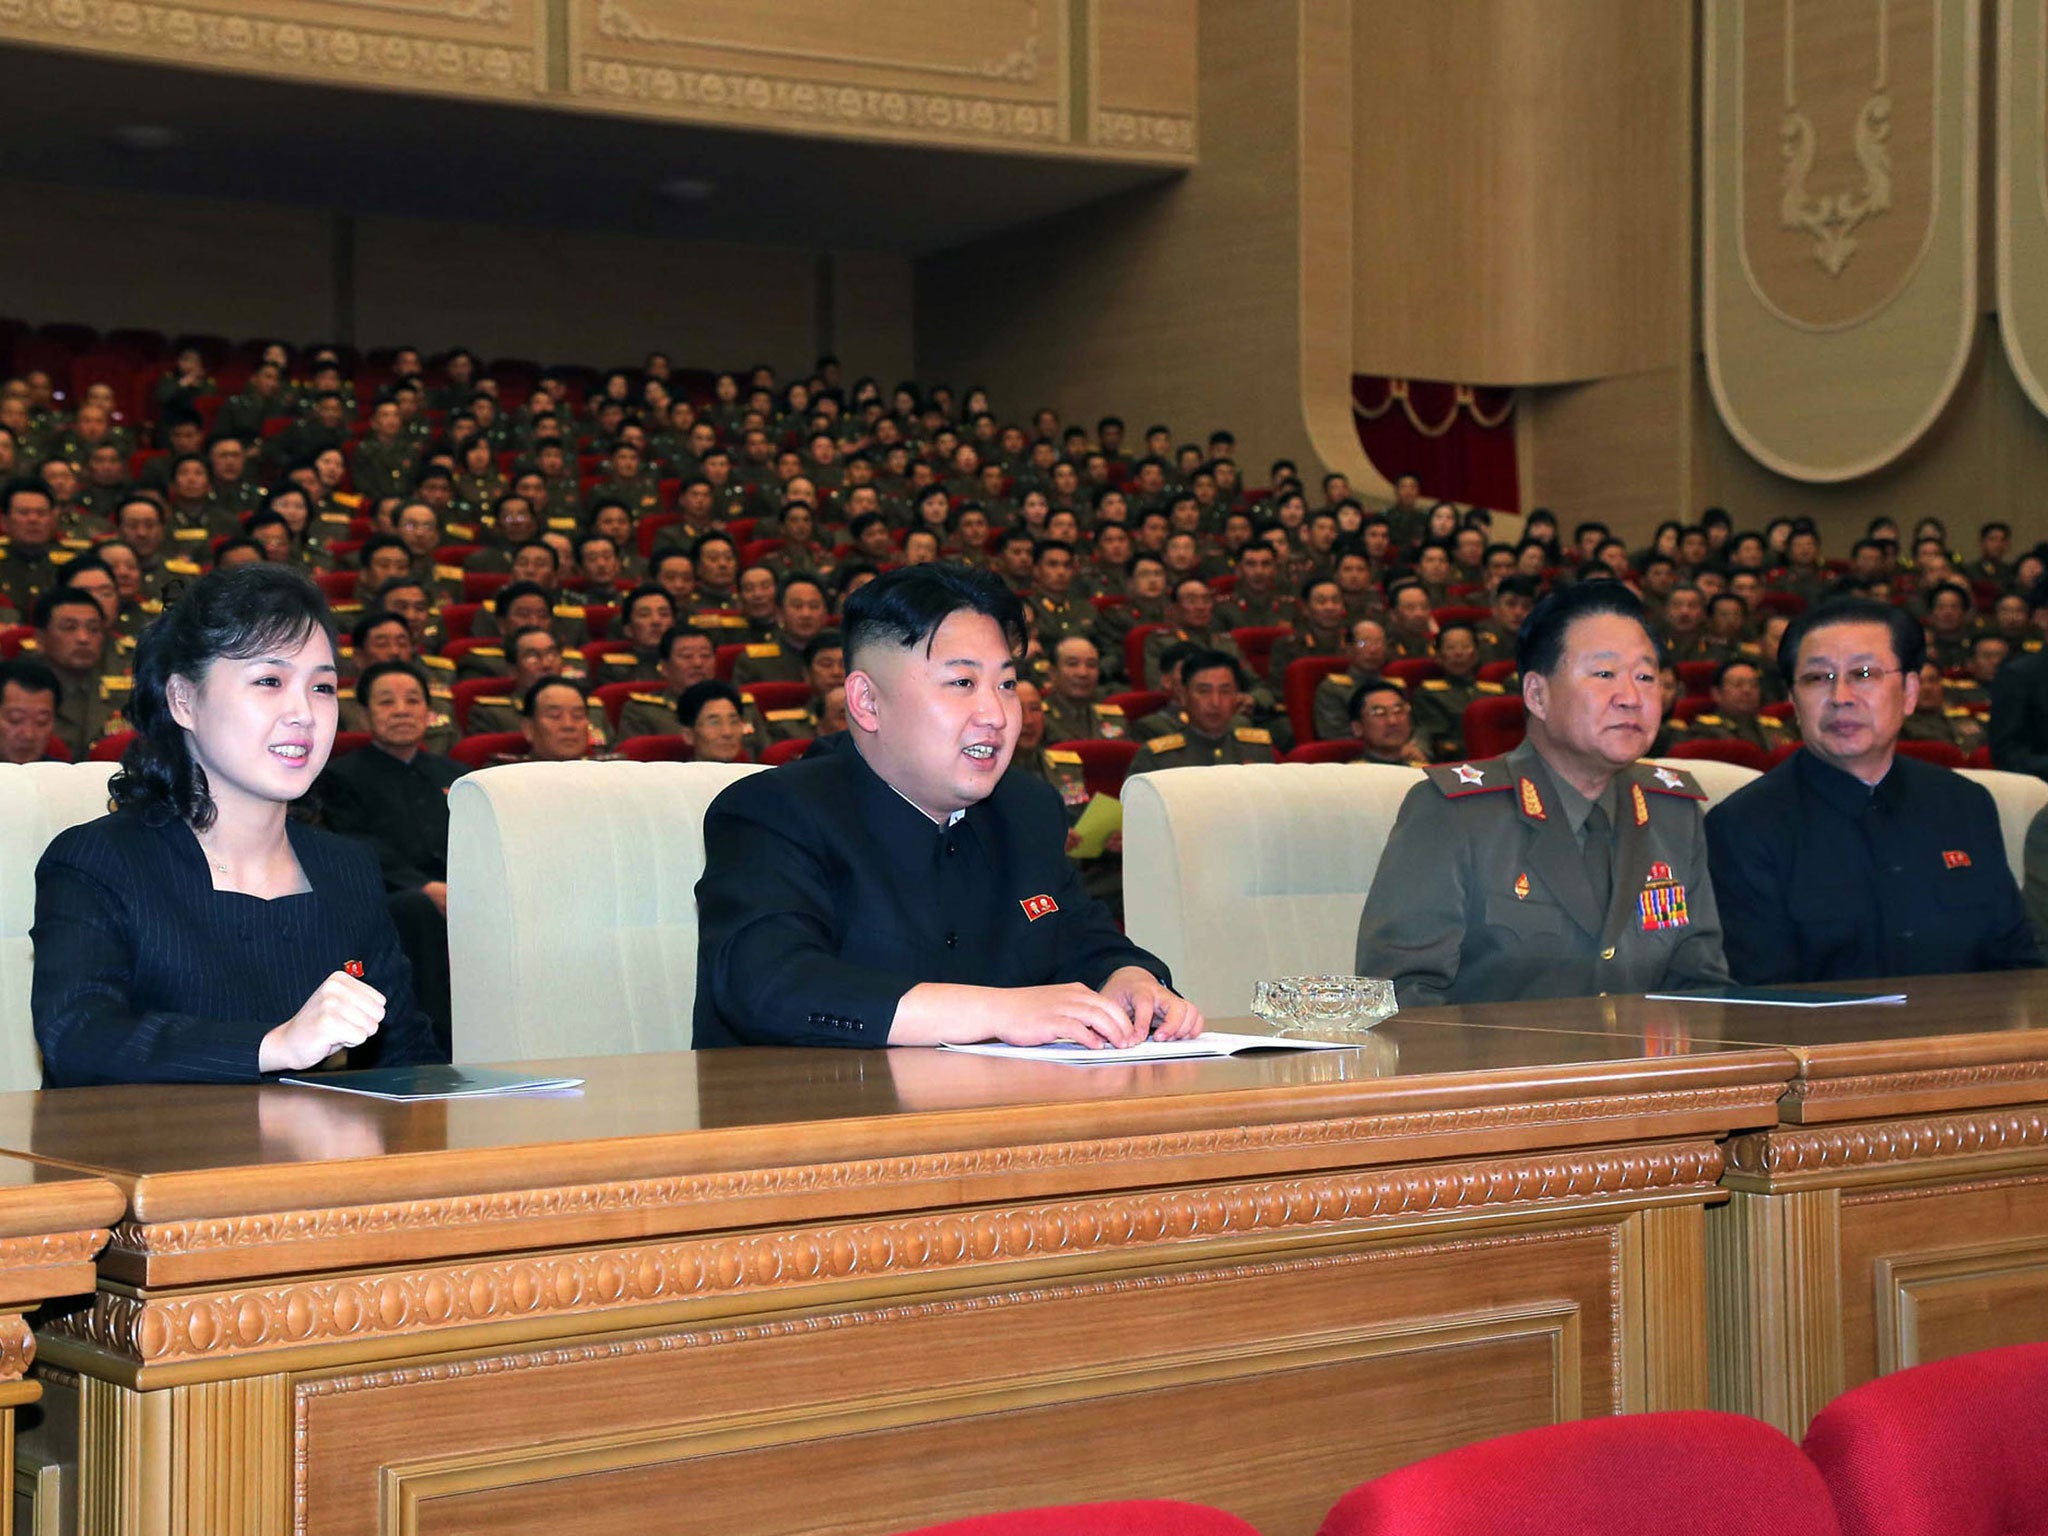 A photo released by North Korea's media in 2013 shows Kim Jong-un and his wife Ri Sol Ju.